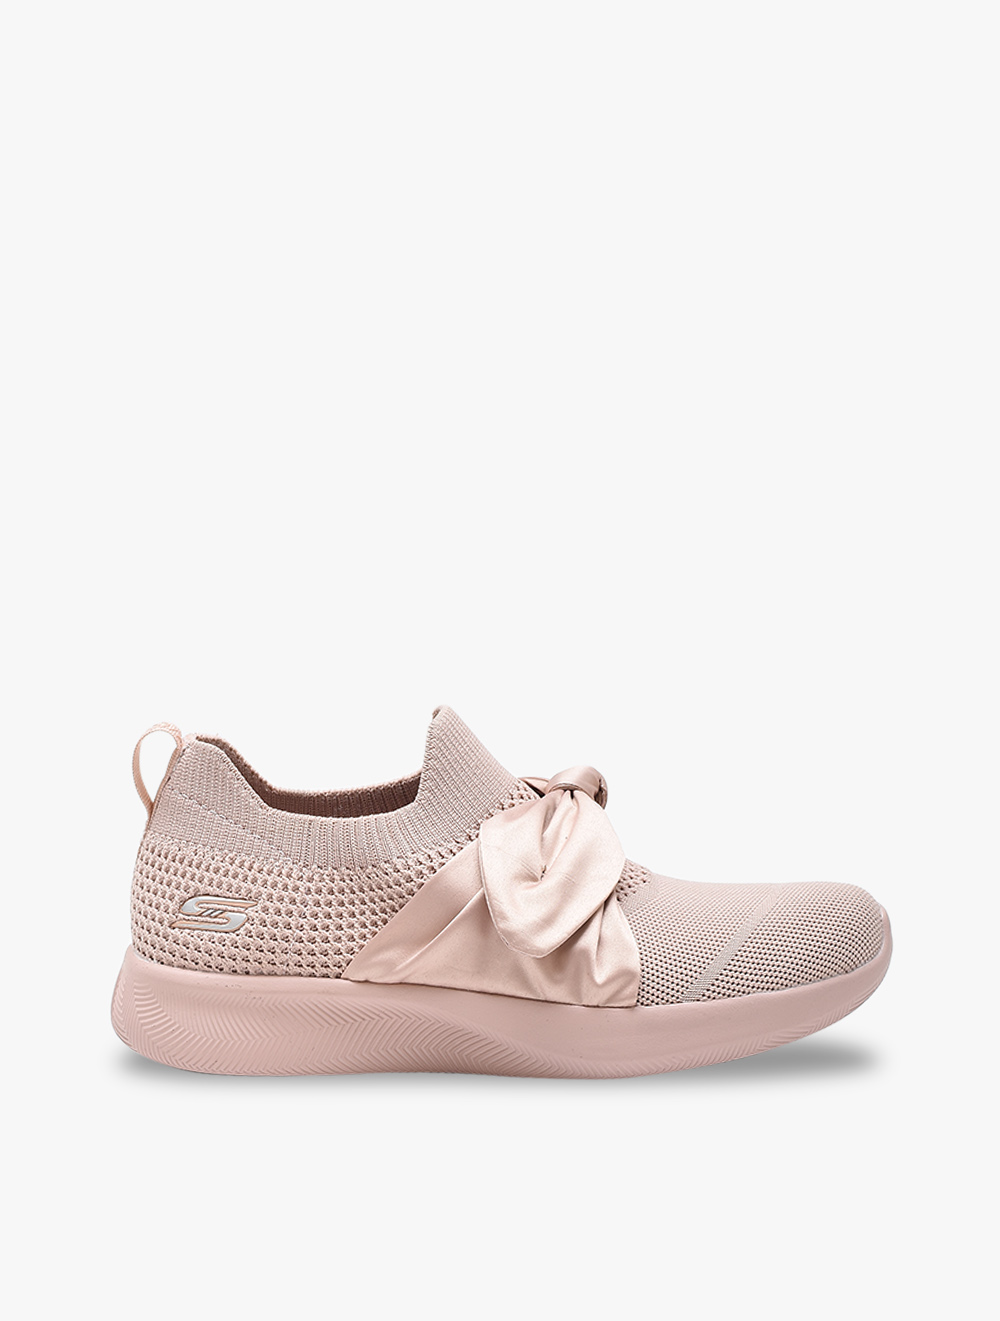 skechers pink bow